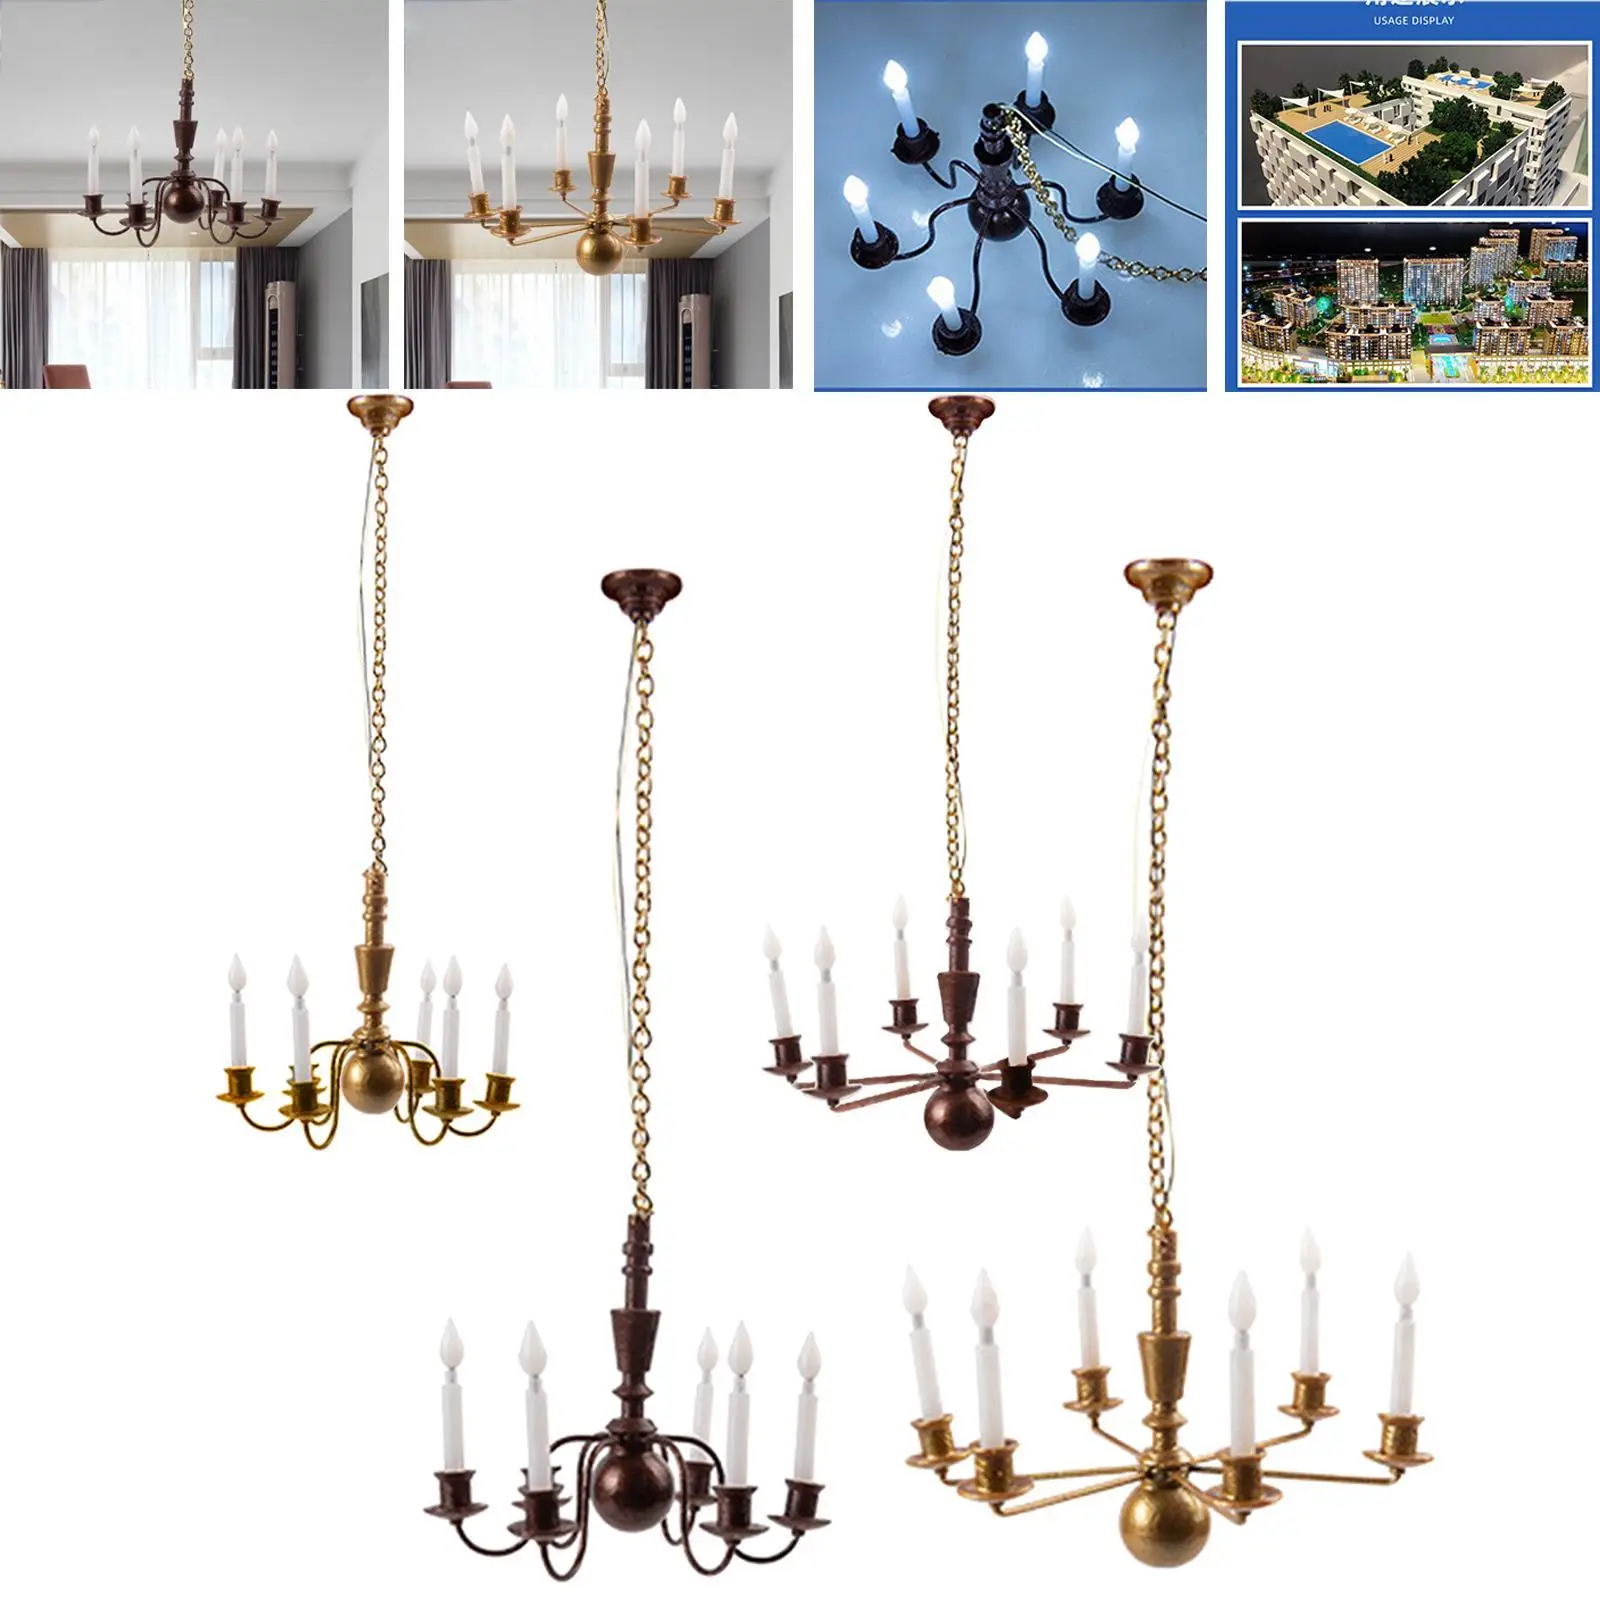 Modern Candle Style Ceiling Light Fixture Chandelier Ceiling Lamps for DIY Fairy Garden Model Building Kits 1:87 HO Scale